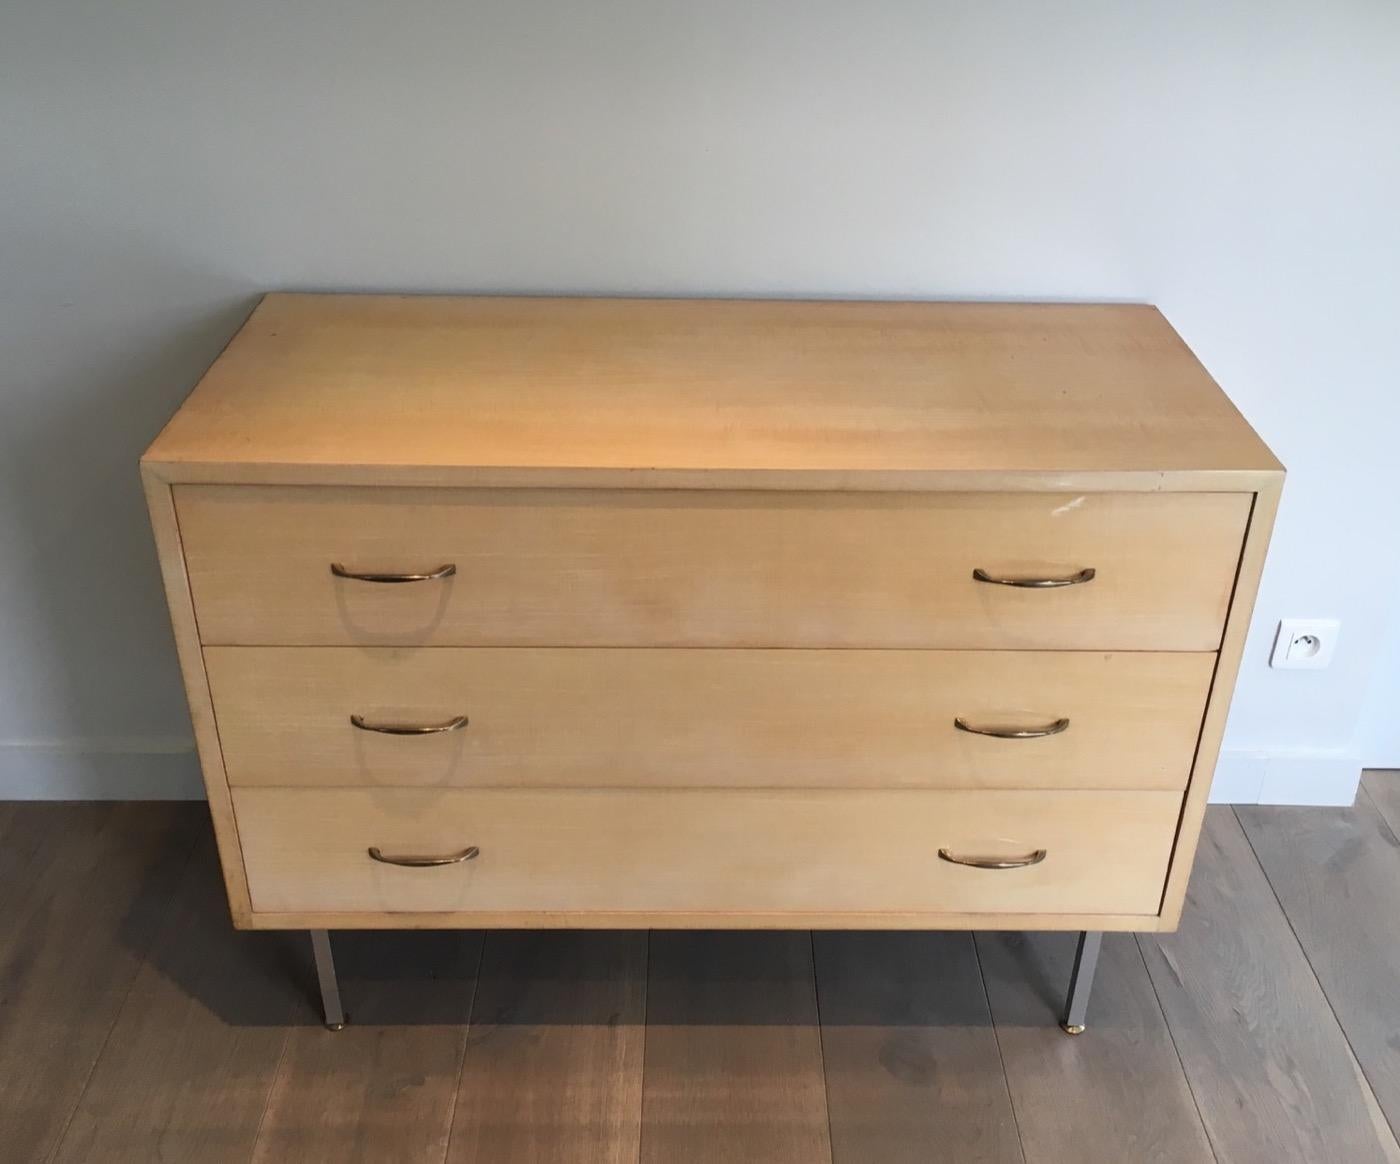 This rare and nice commode is made of Sycamore on a brushed steel base. The inside of the drawers of this chest is made of blond mahogany. This is a nice and simple design in the style of famous designer Florence Knoll. Circa 1970.